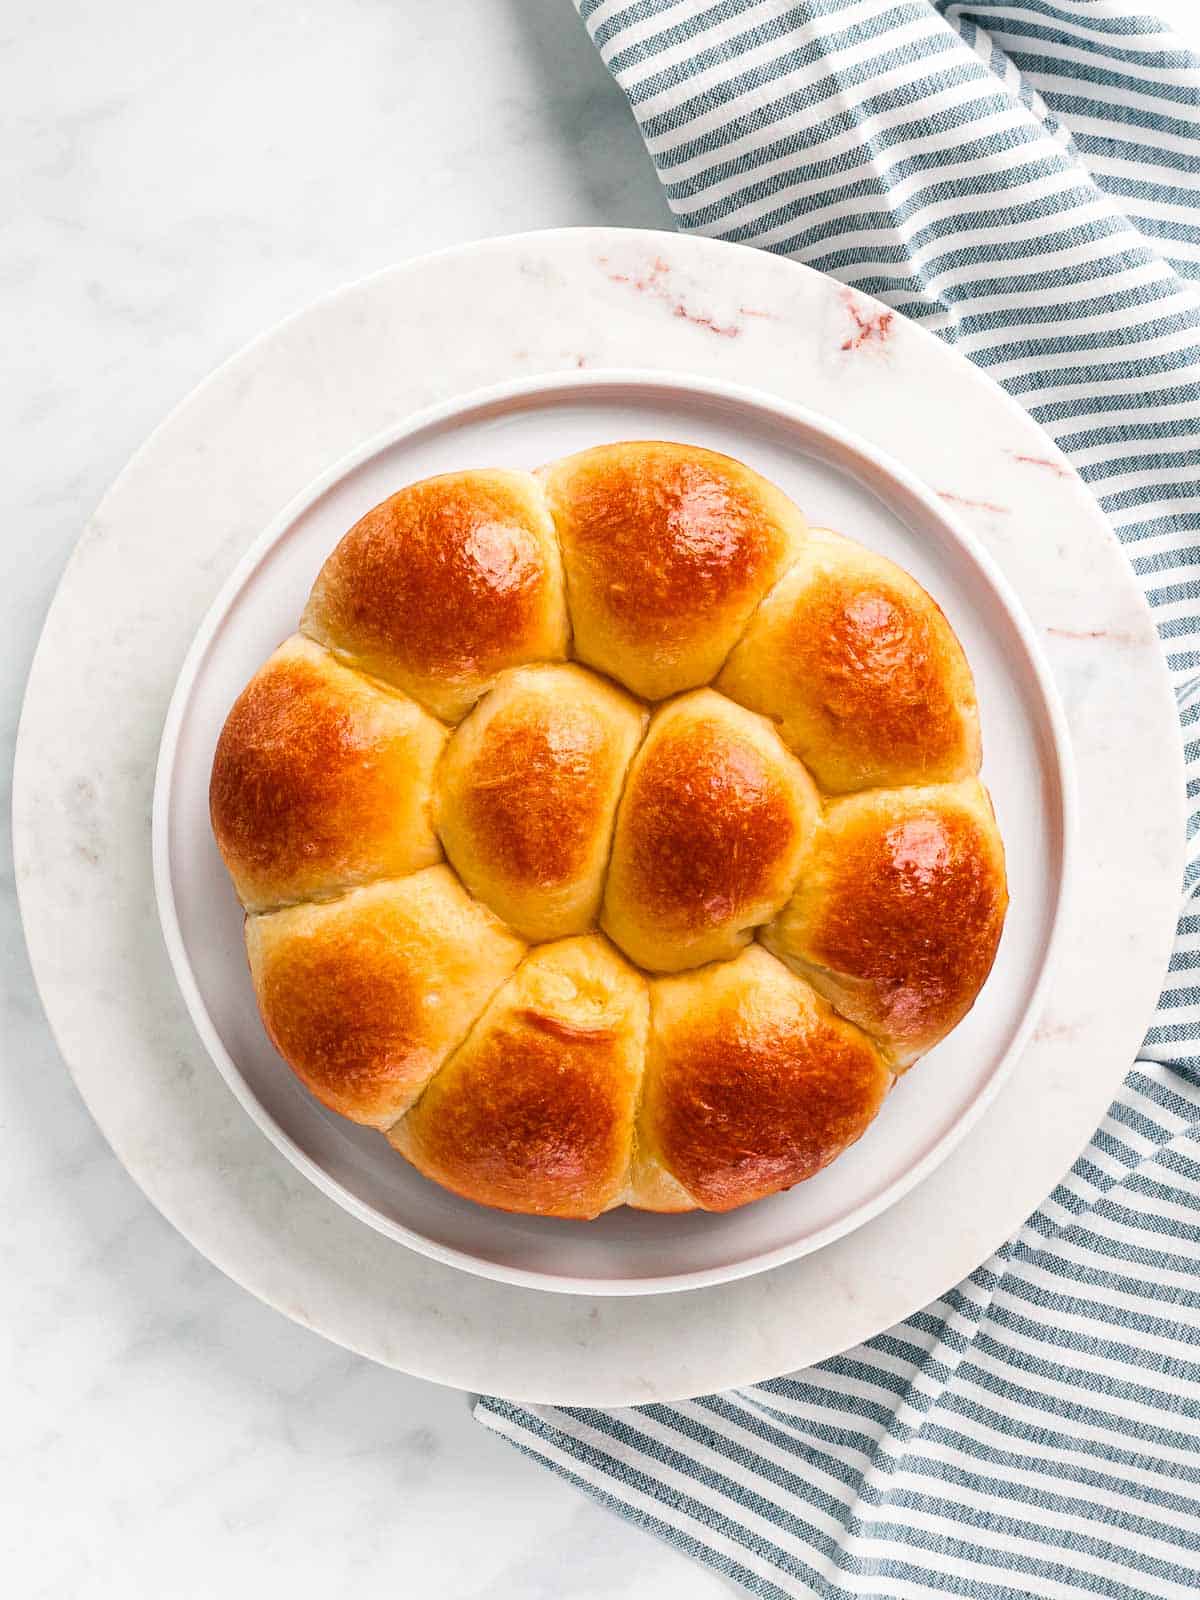 Buttery brioche rolls baked in a round pan on a white plate.